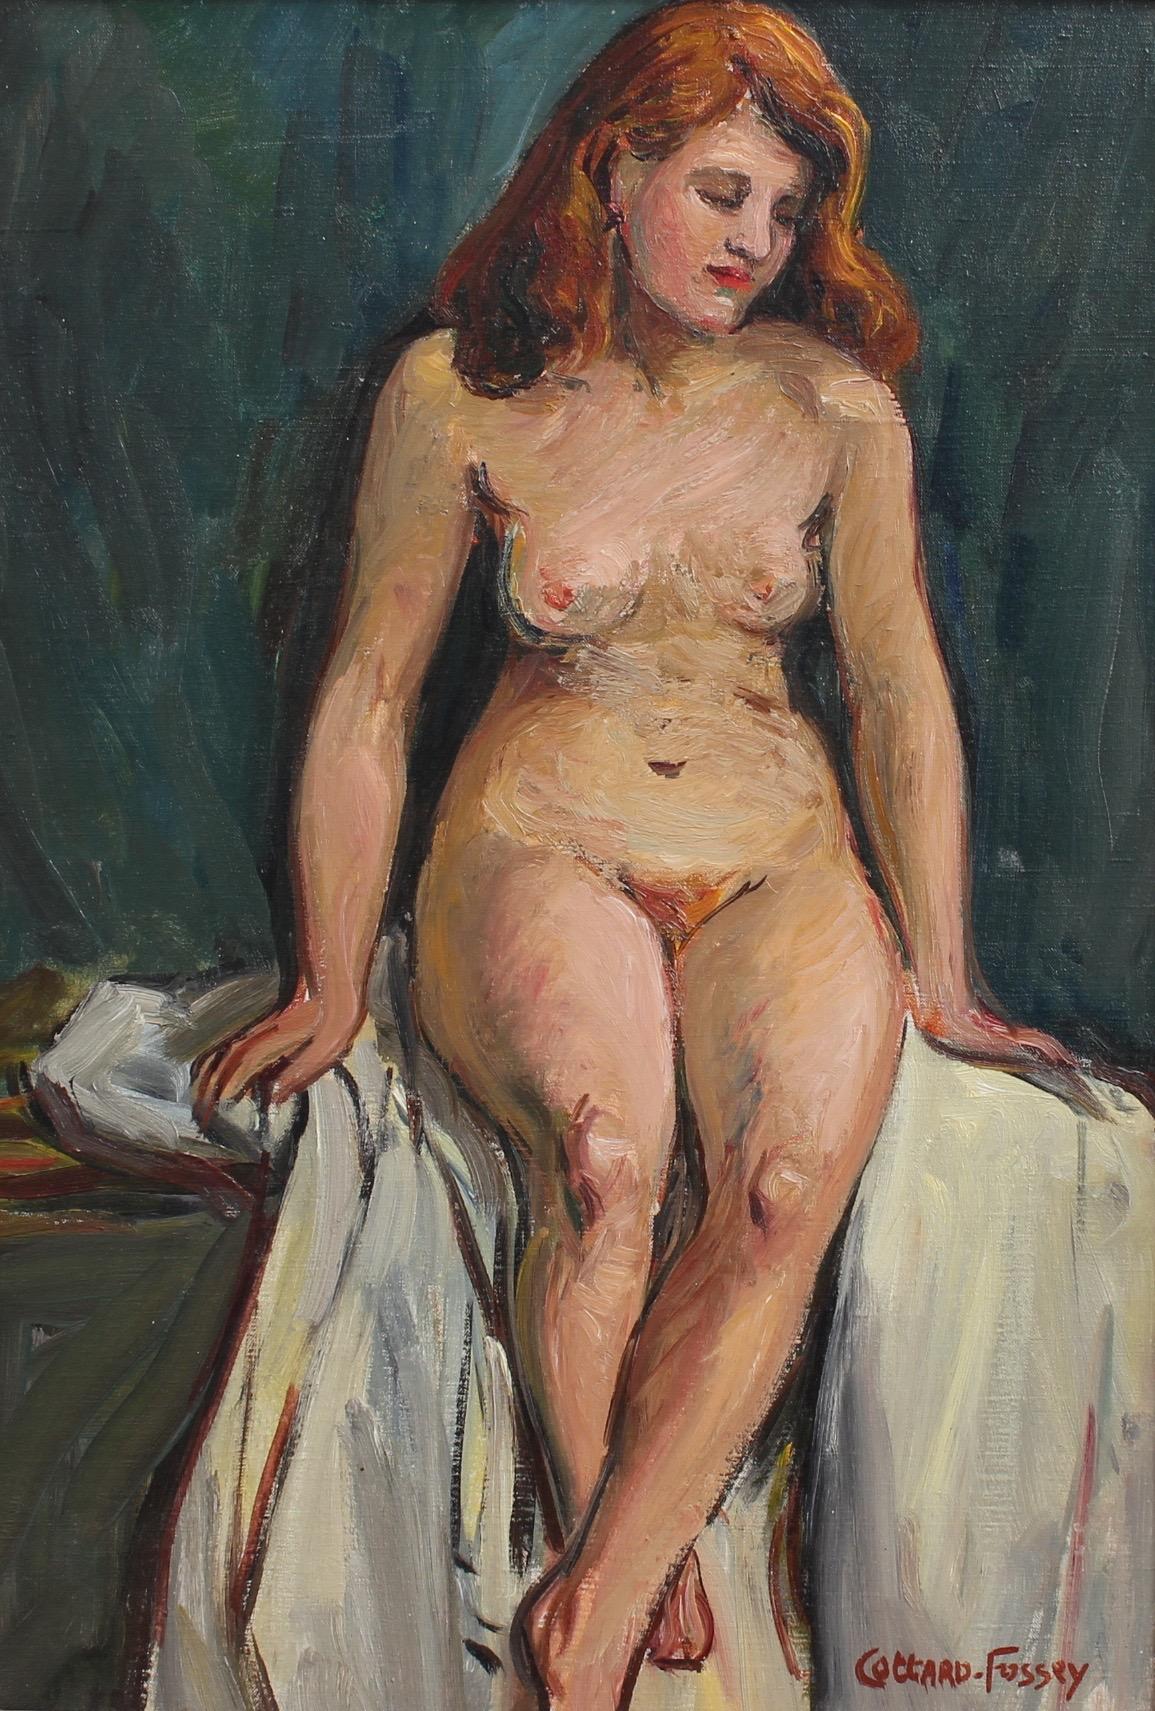 Portrait of Nude Redhead - Painting by Louise Jeanne Cottard-Fossey